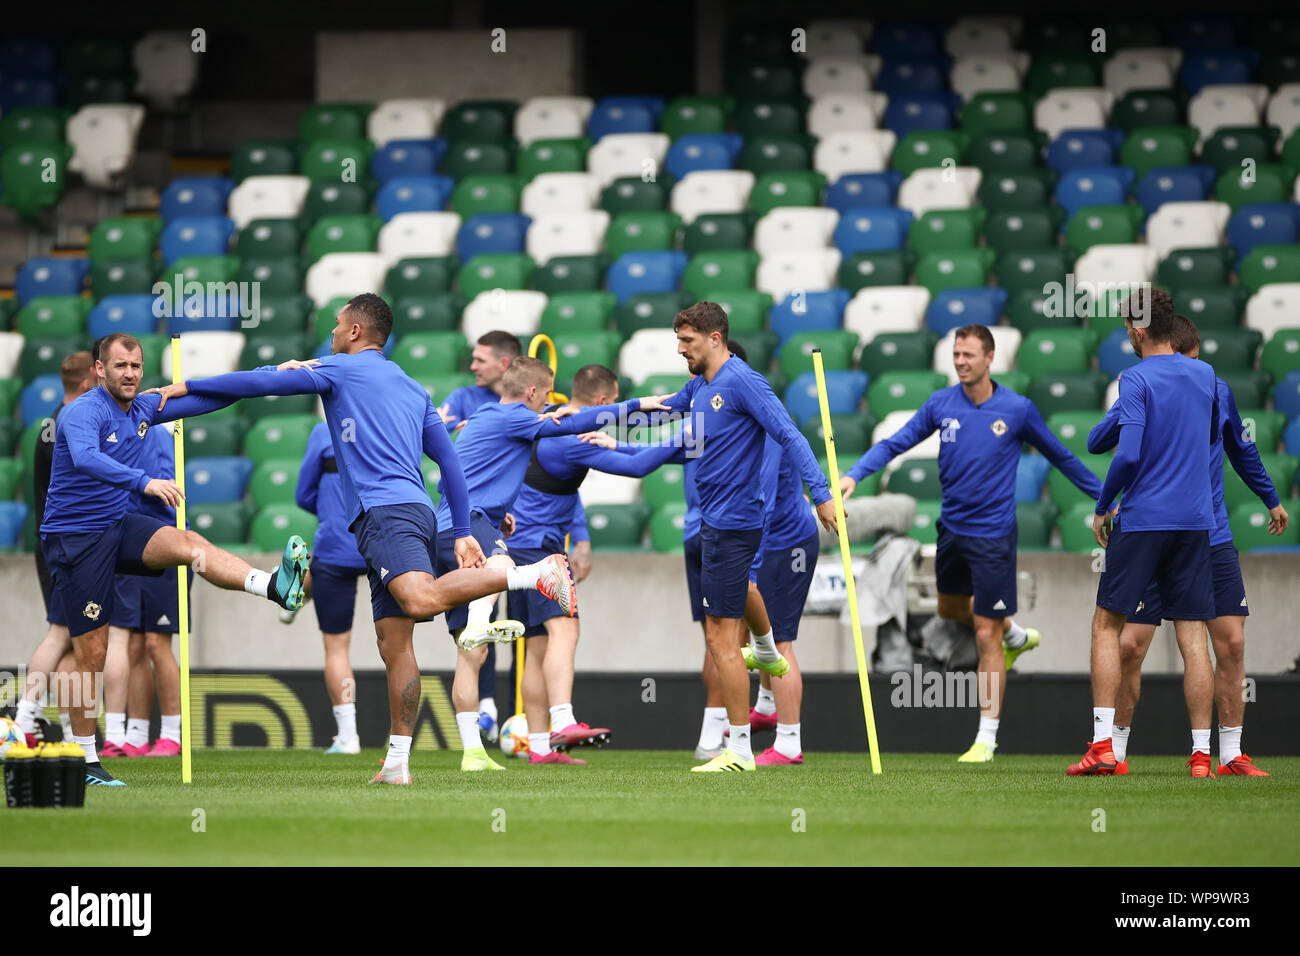 Belfast, UK. 08th Sep, 2019. Soccer: National team, final training Northern Ireland before the European Championship qualifier Northern Ireland - Germany in Windsor Park Stadium. The players warm up at the final practice. Credit: Christian Charisius/dpa/Alamy Live News Stock Photo